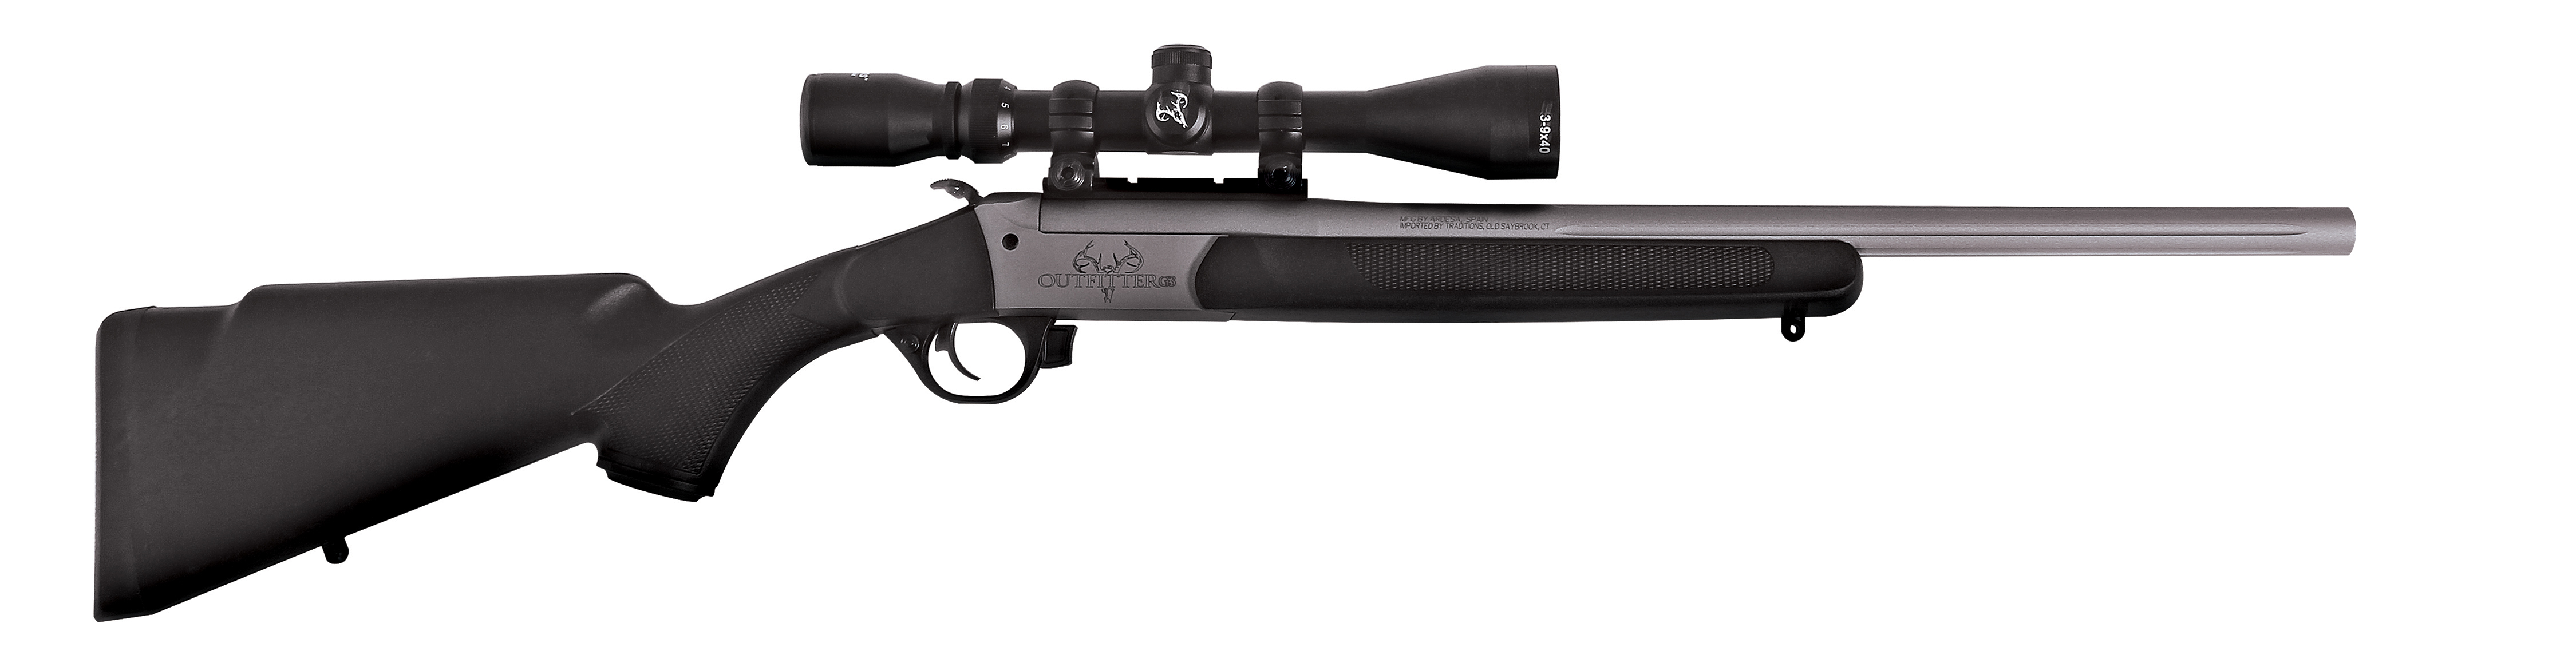 Traditions Outfitter G3 Rifle w/3-9x40 Scope